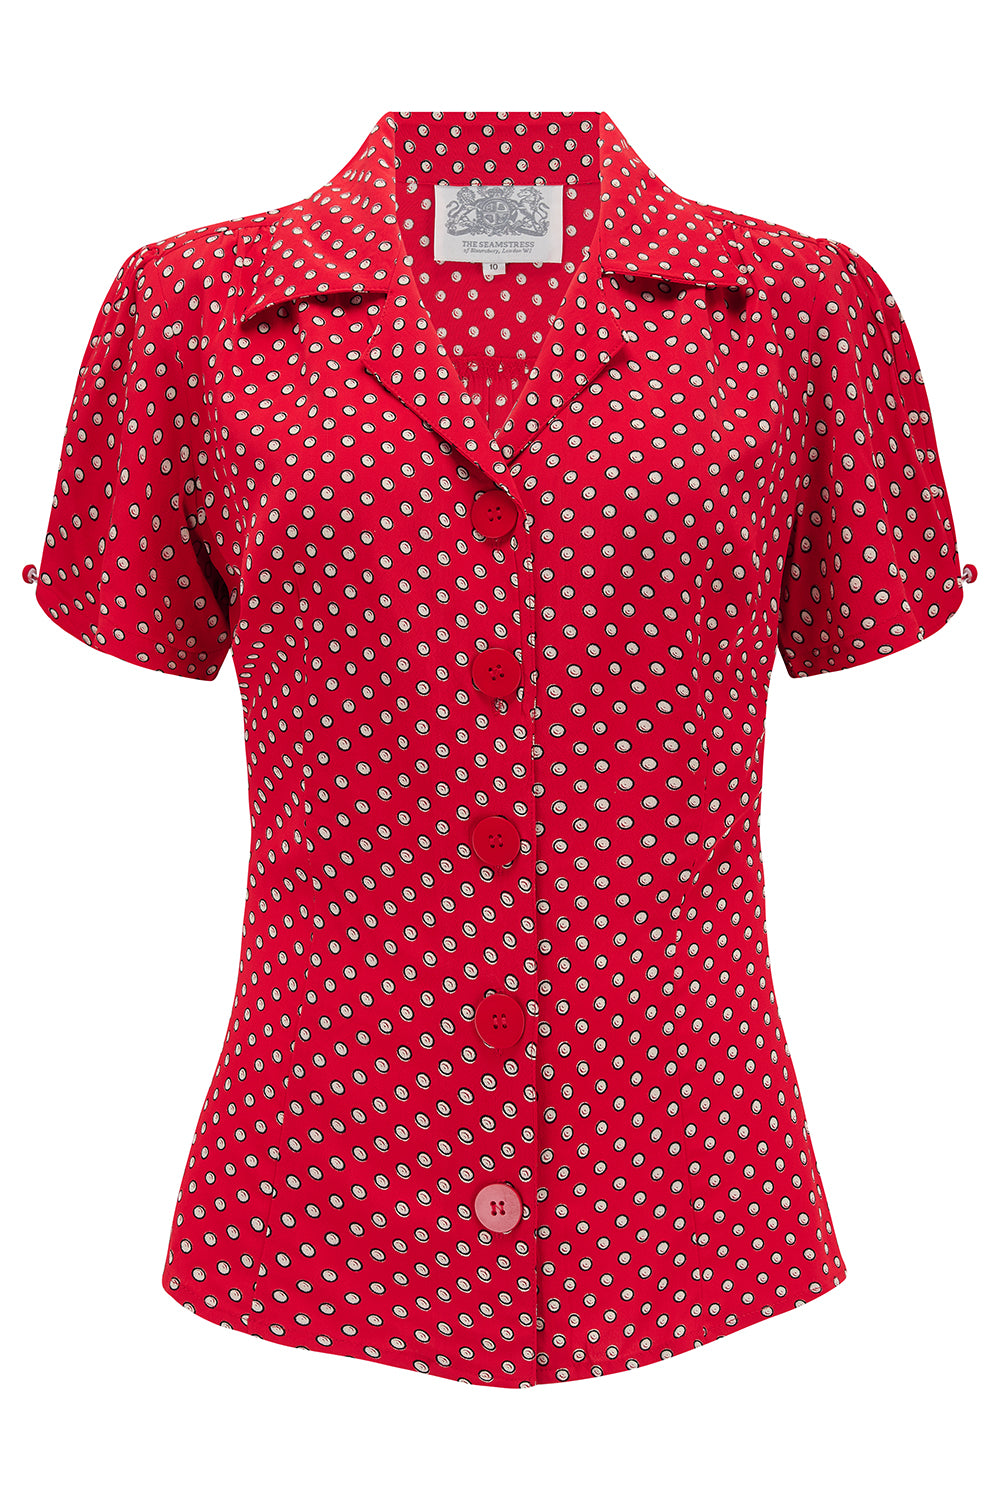 "Grace" Blouse in Red Ditzy Print CC41, Authentic & Classic 1940s Vintage Style - True and authentic vintage style clothing, inspired by the Classic styles of CC41 , WW2 and the fun 1950s RocknRoll era, for everyday wear plus events like Goodwood Revival, Twinwood Festival and Viva Las Vegas Rockabilly Weekend Rock n Romance The Seamstress Of Bloomsbury